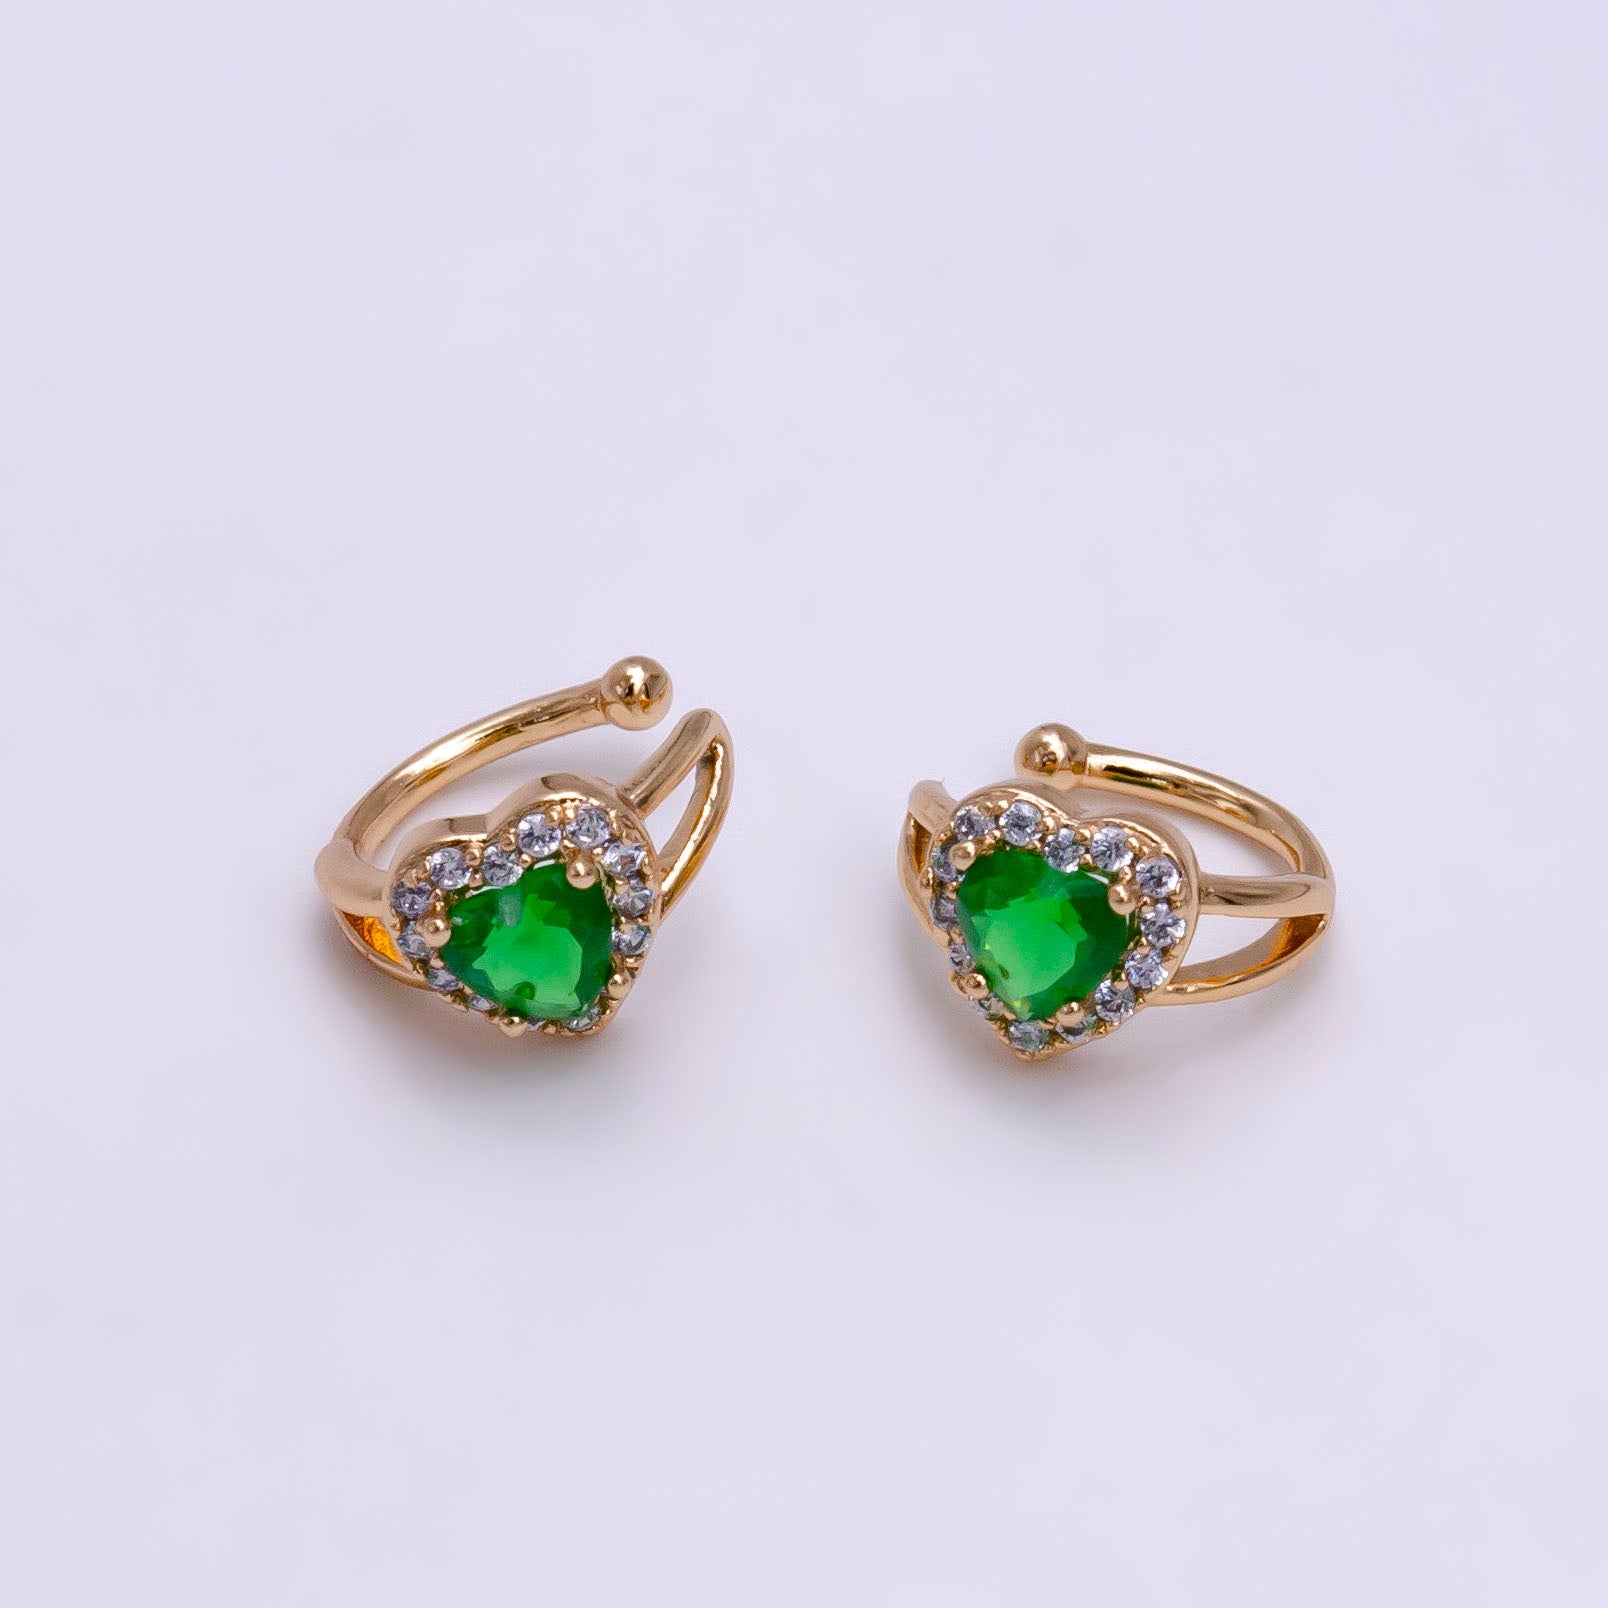 1x Blue Green Ear Cuffs for Non Pierced Ears Micro Pave Crystal Gold Clip on Conch Cuff Earrings for Women Girls, AI-062 AI-063. - DLUXCA